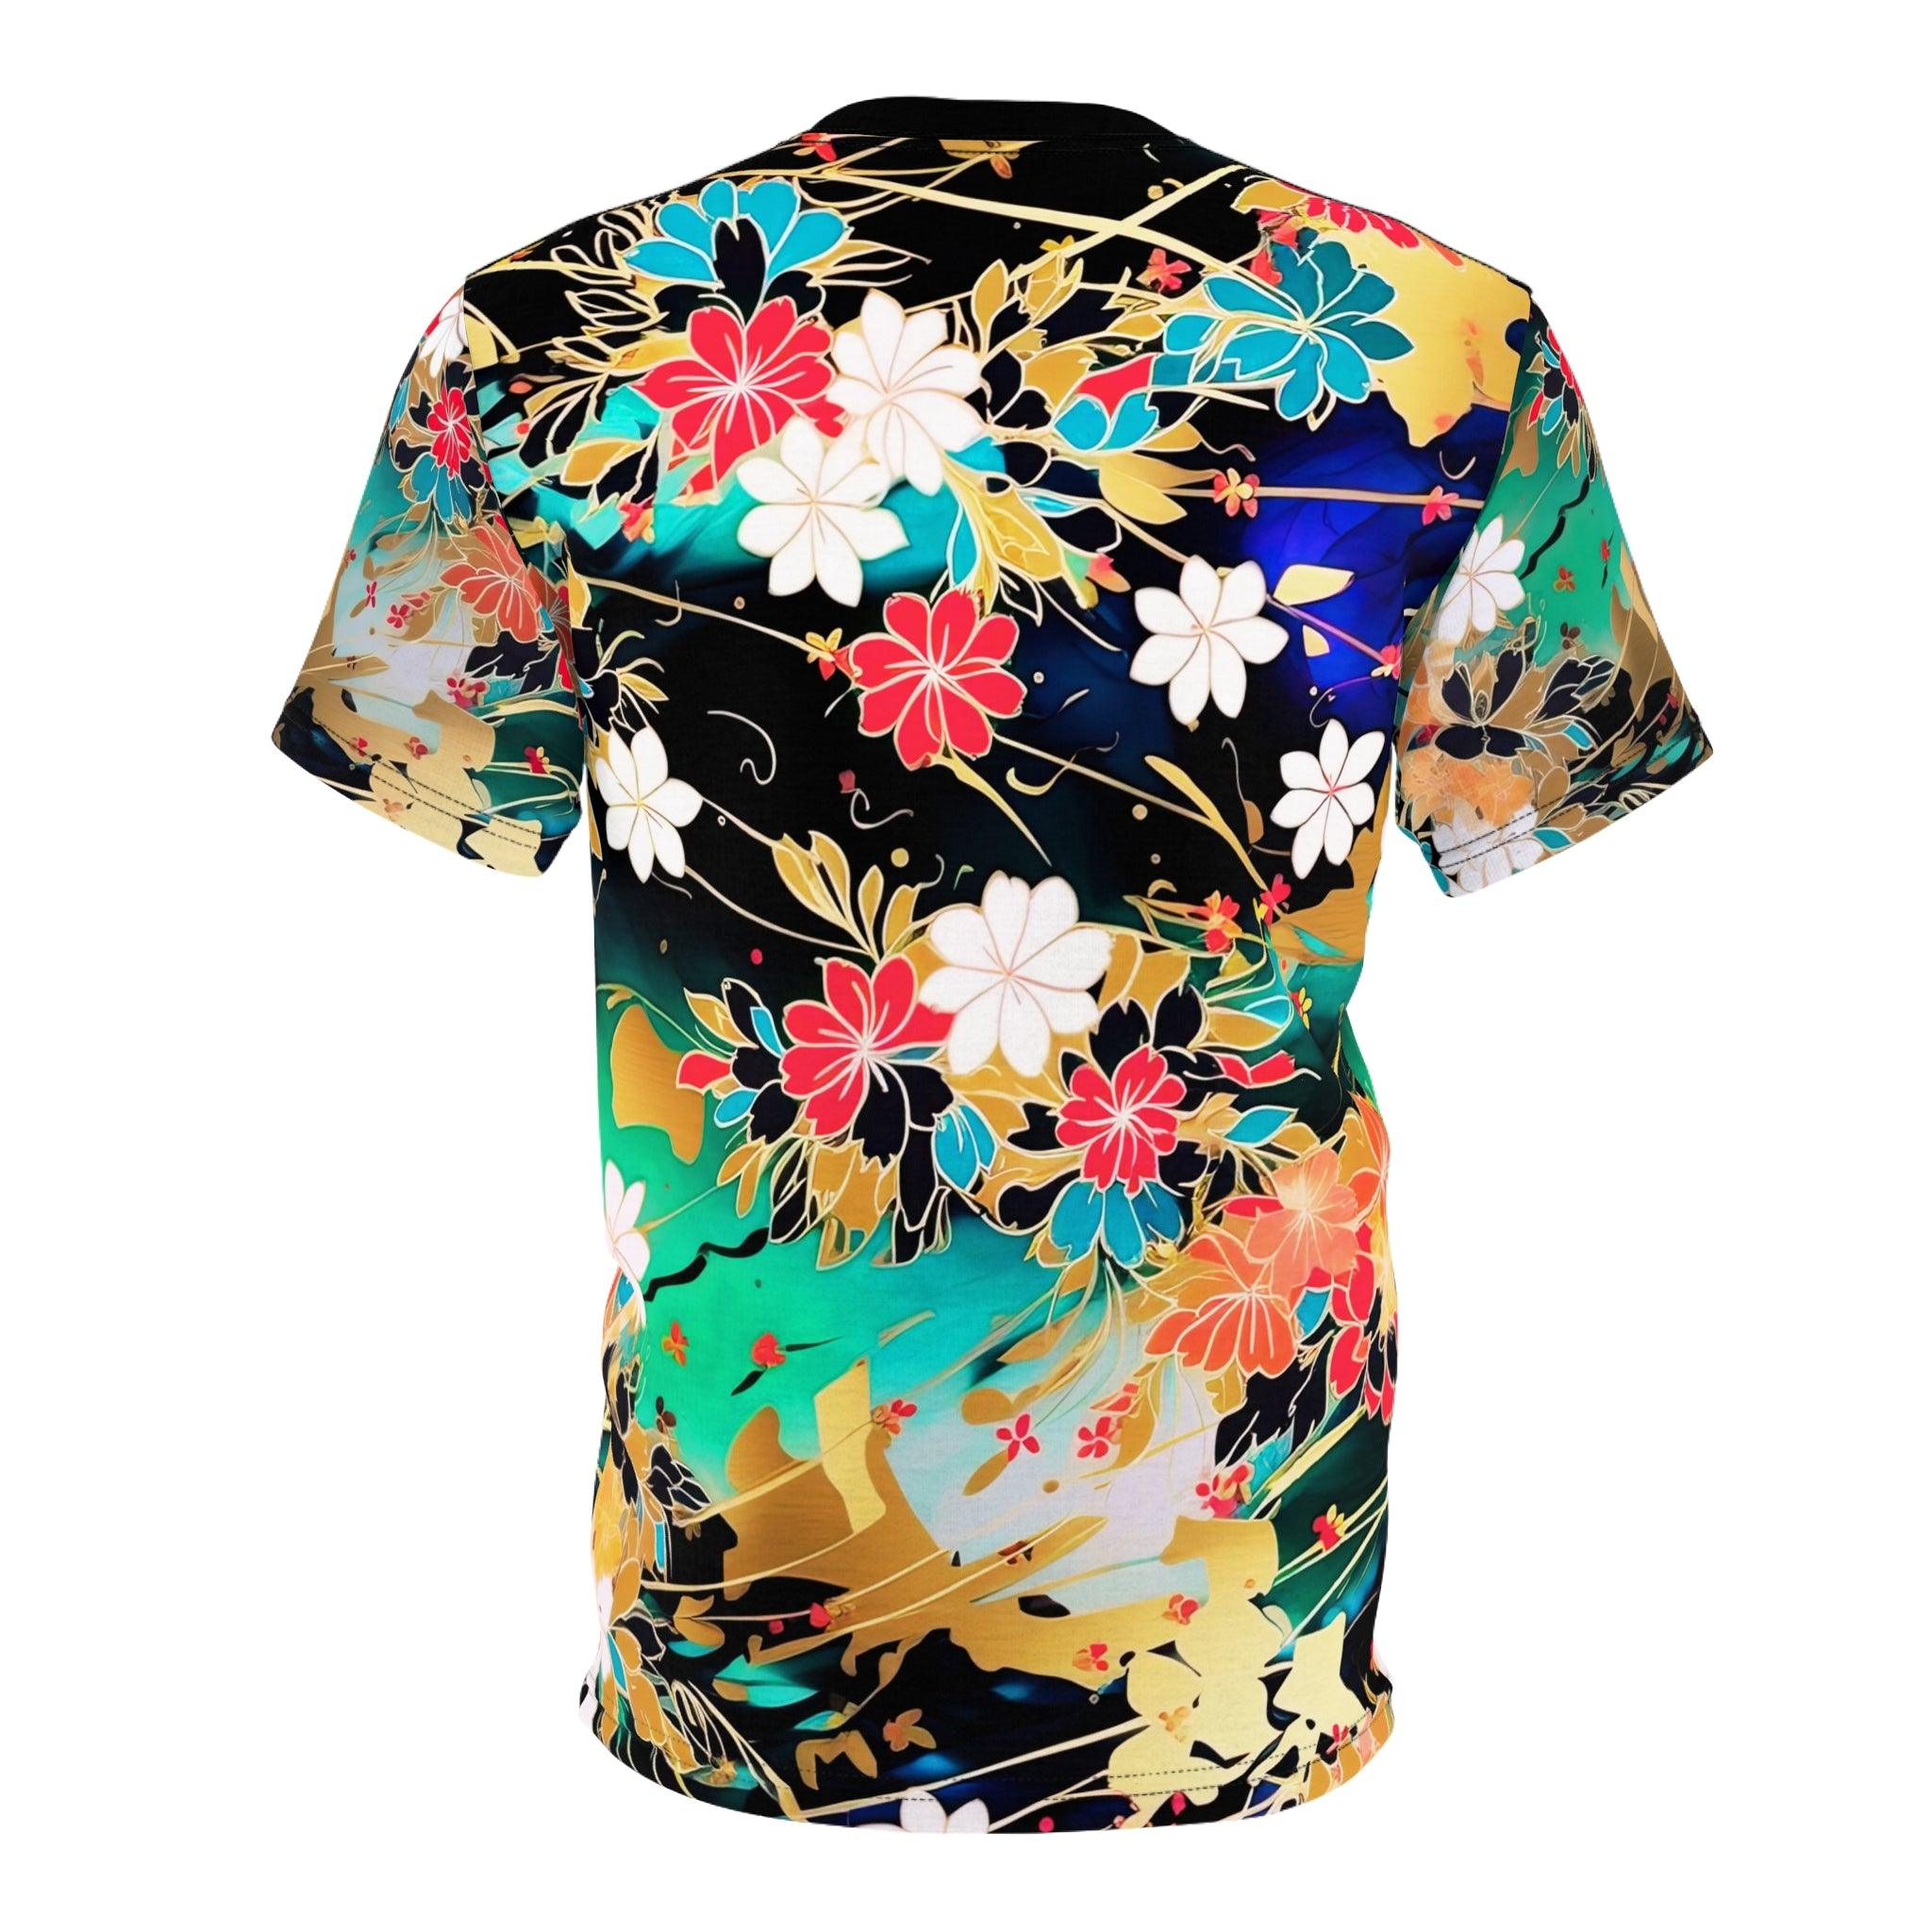 Japanese Chiyogami Flowers Print Colorful T-Shirt - ELIVIOR